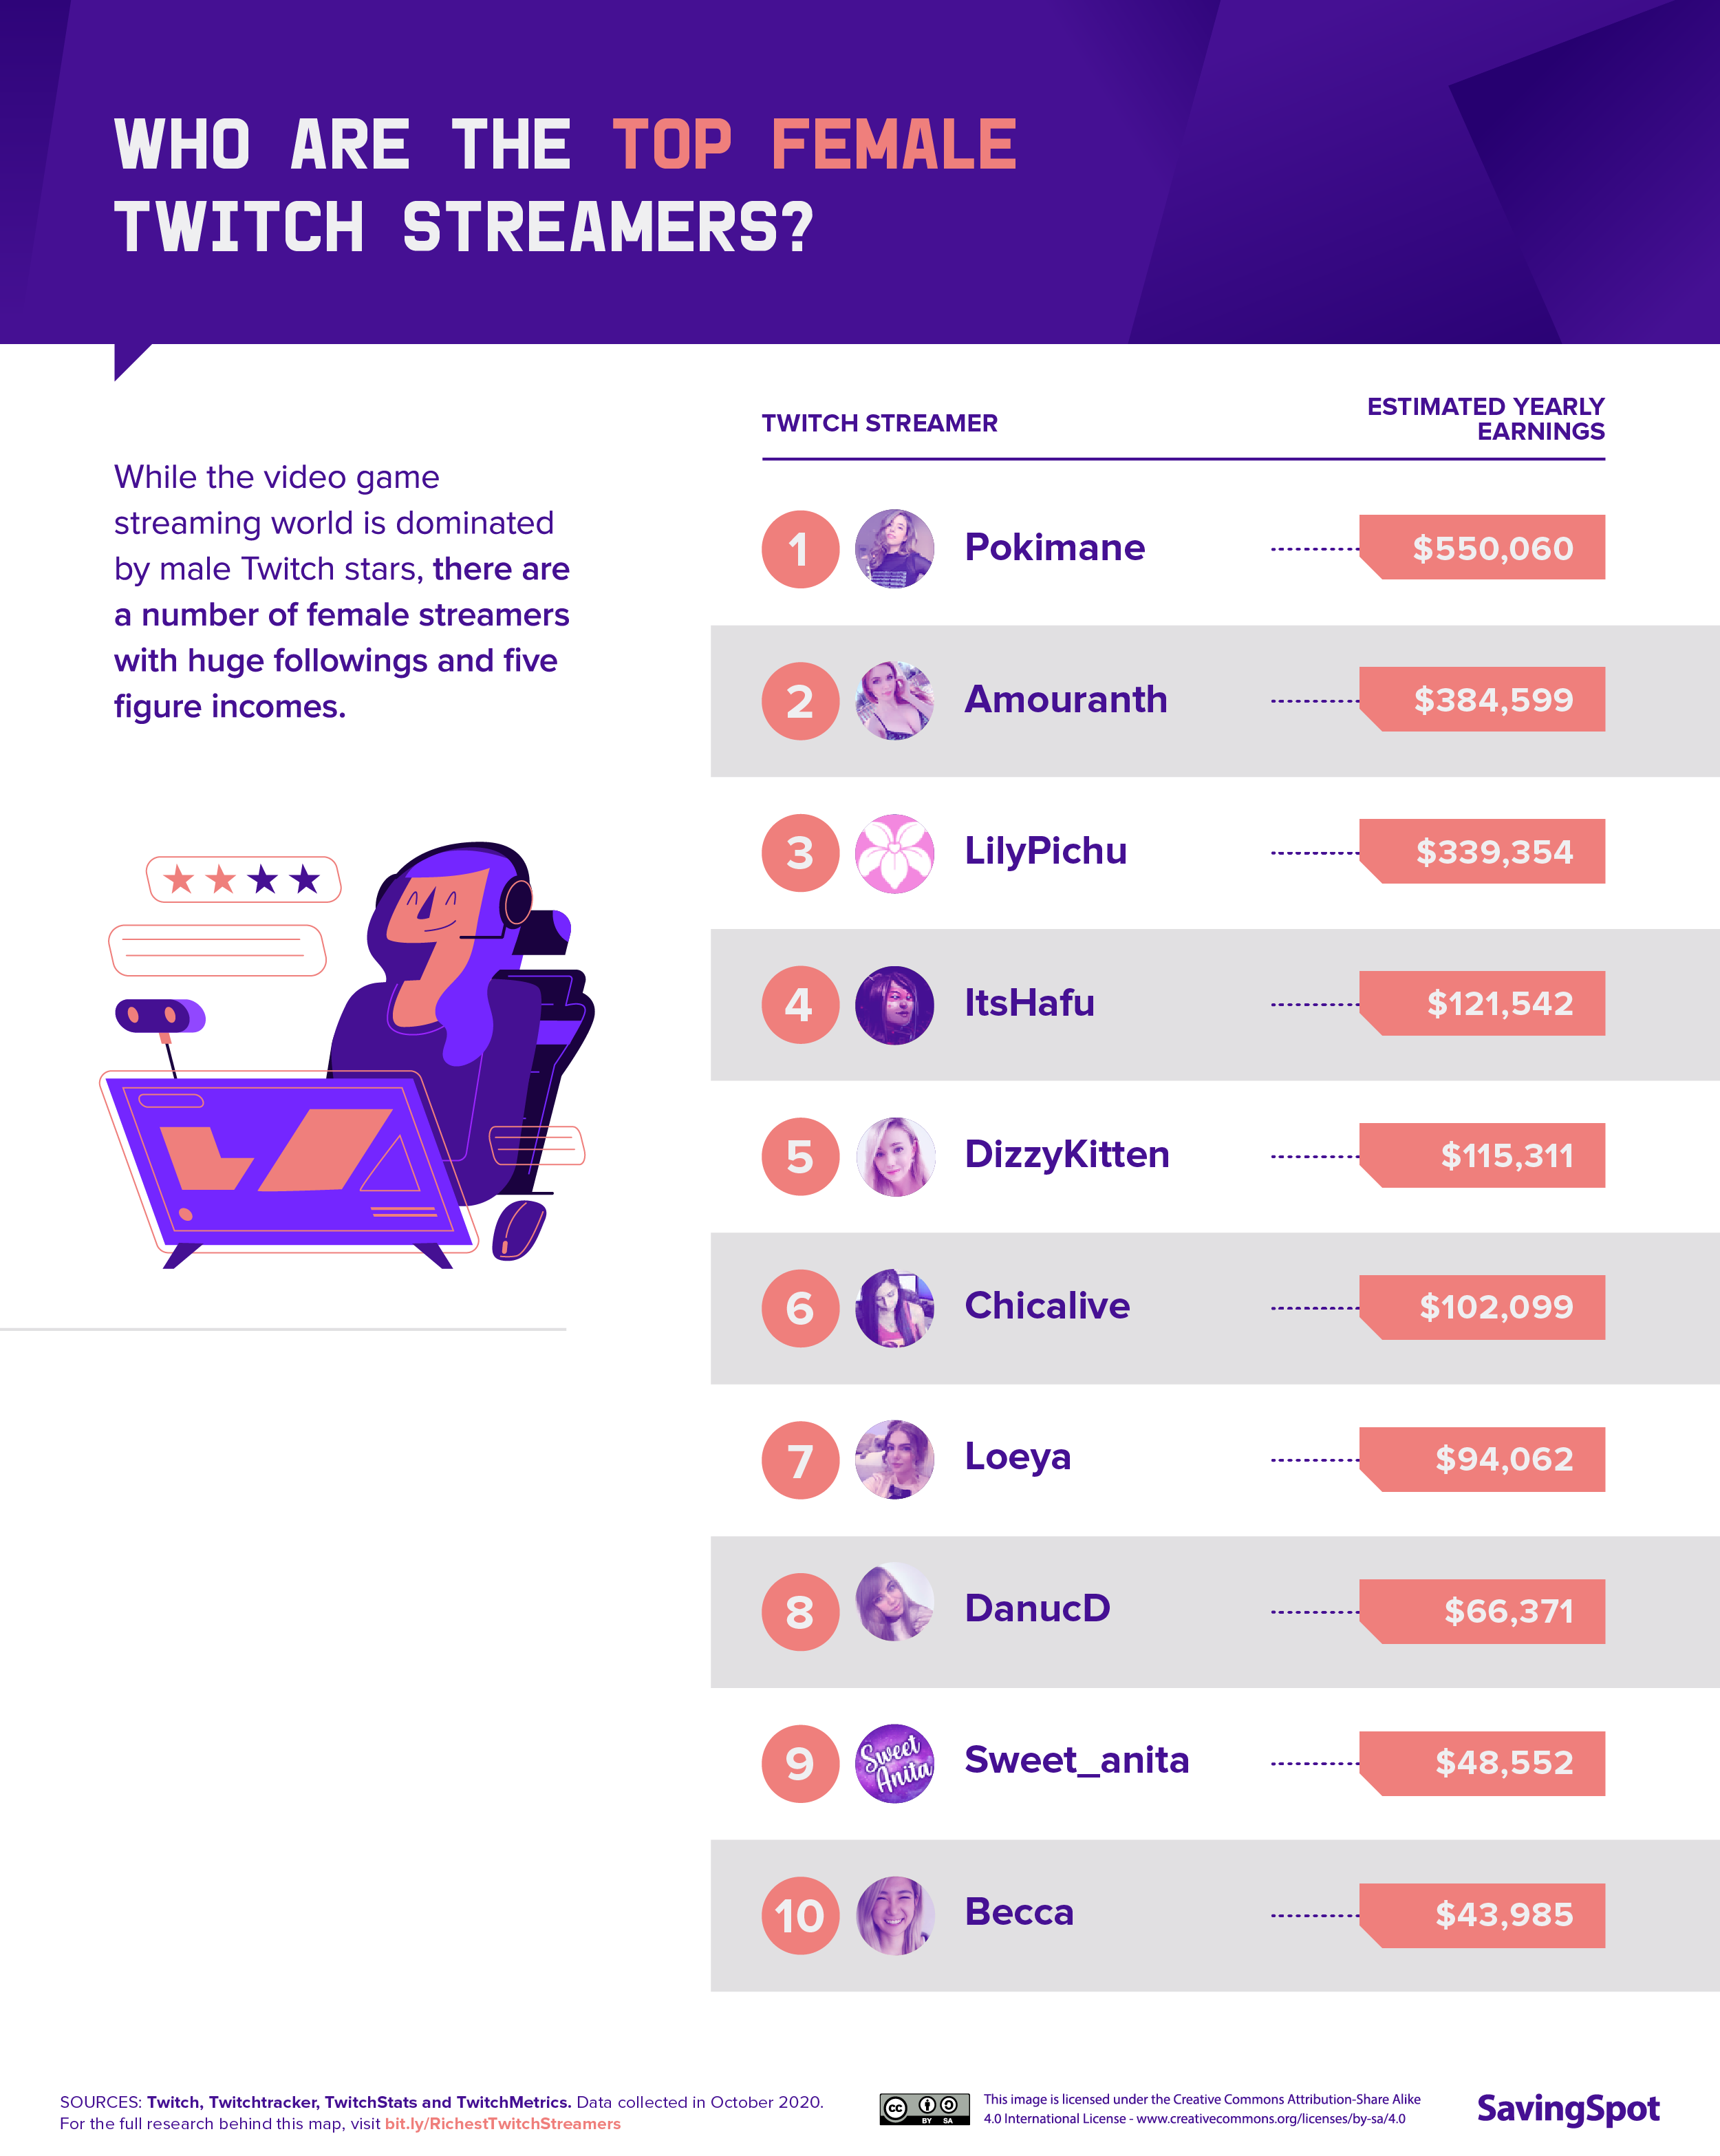 OC] The Highest Paid Twitch Streamers : r/visualization